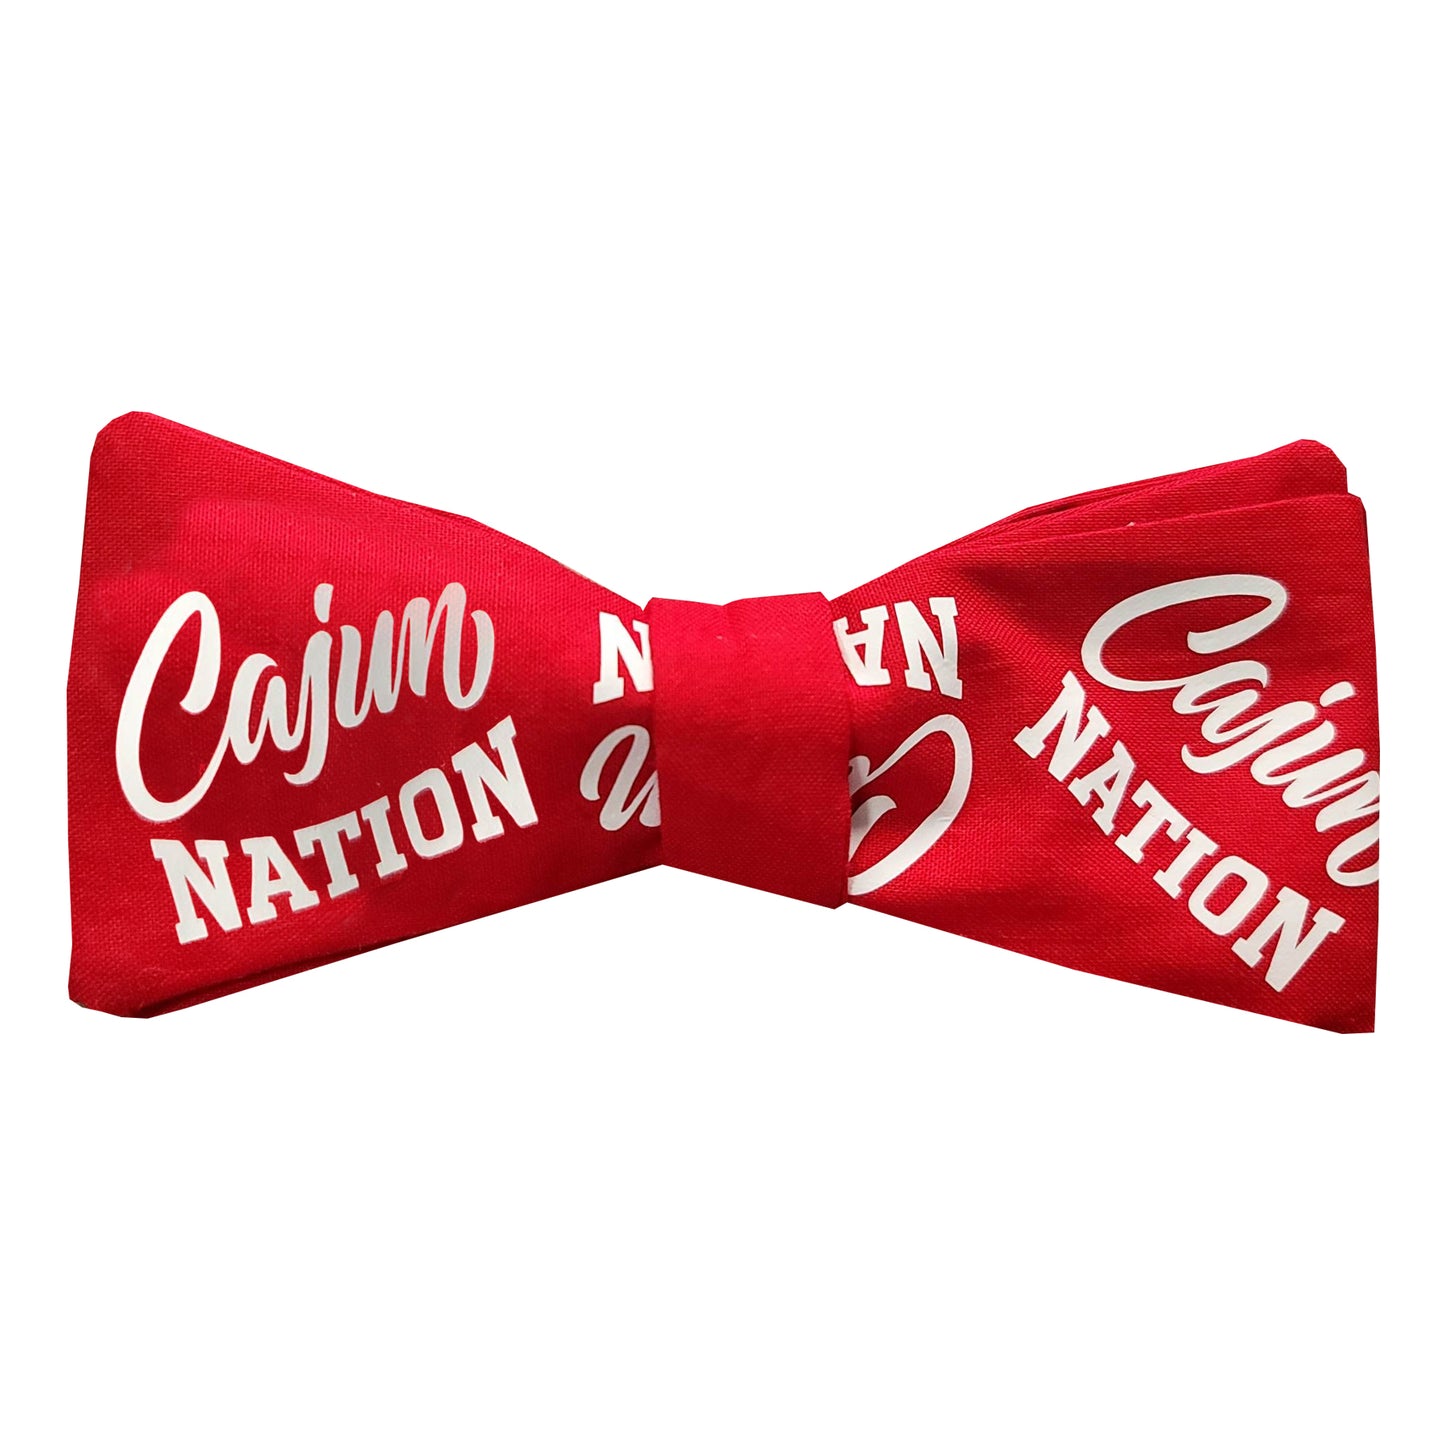 Cajun Nation Red Bow Tie Adult Standard 14-18" strap | bow size ~2.25" x 4.5" Bow Ties For Men - Men's Cotton Self Tie Bowties.  One size fits most! These fashion forward men’s bowties are comfortable enough to wear all day. Material: 100% Cotton